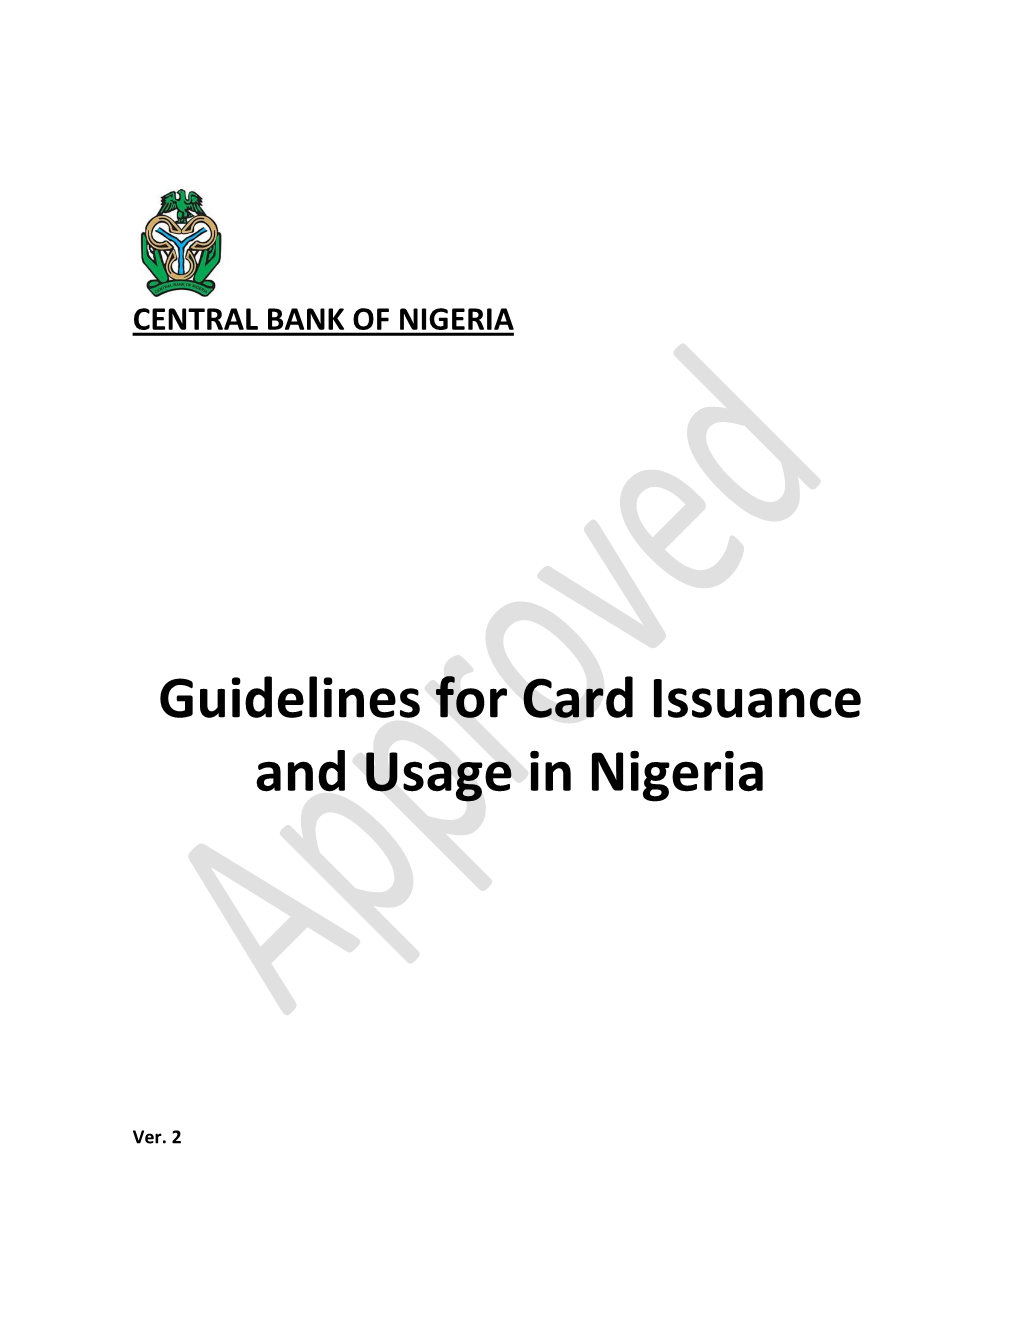 Guidelines for Card Issuance and Usage in Nigeria